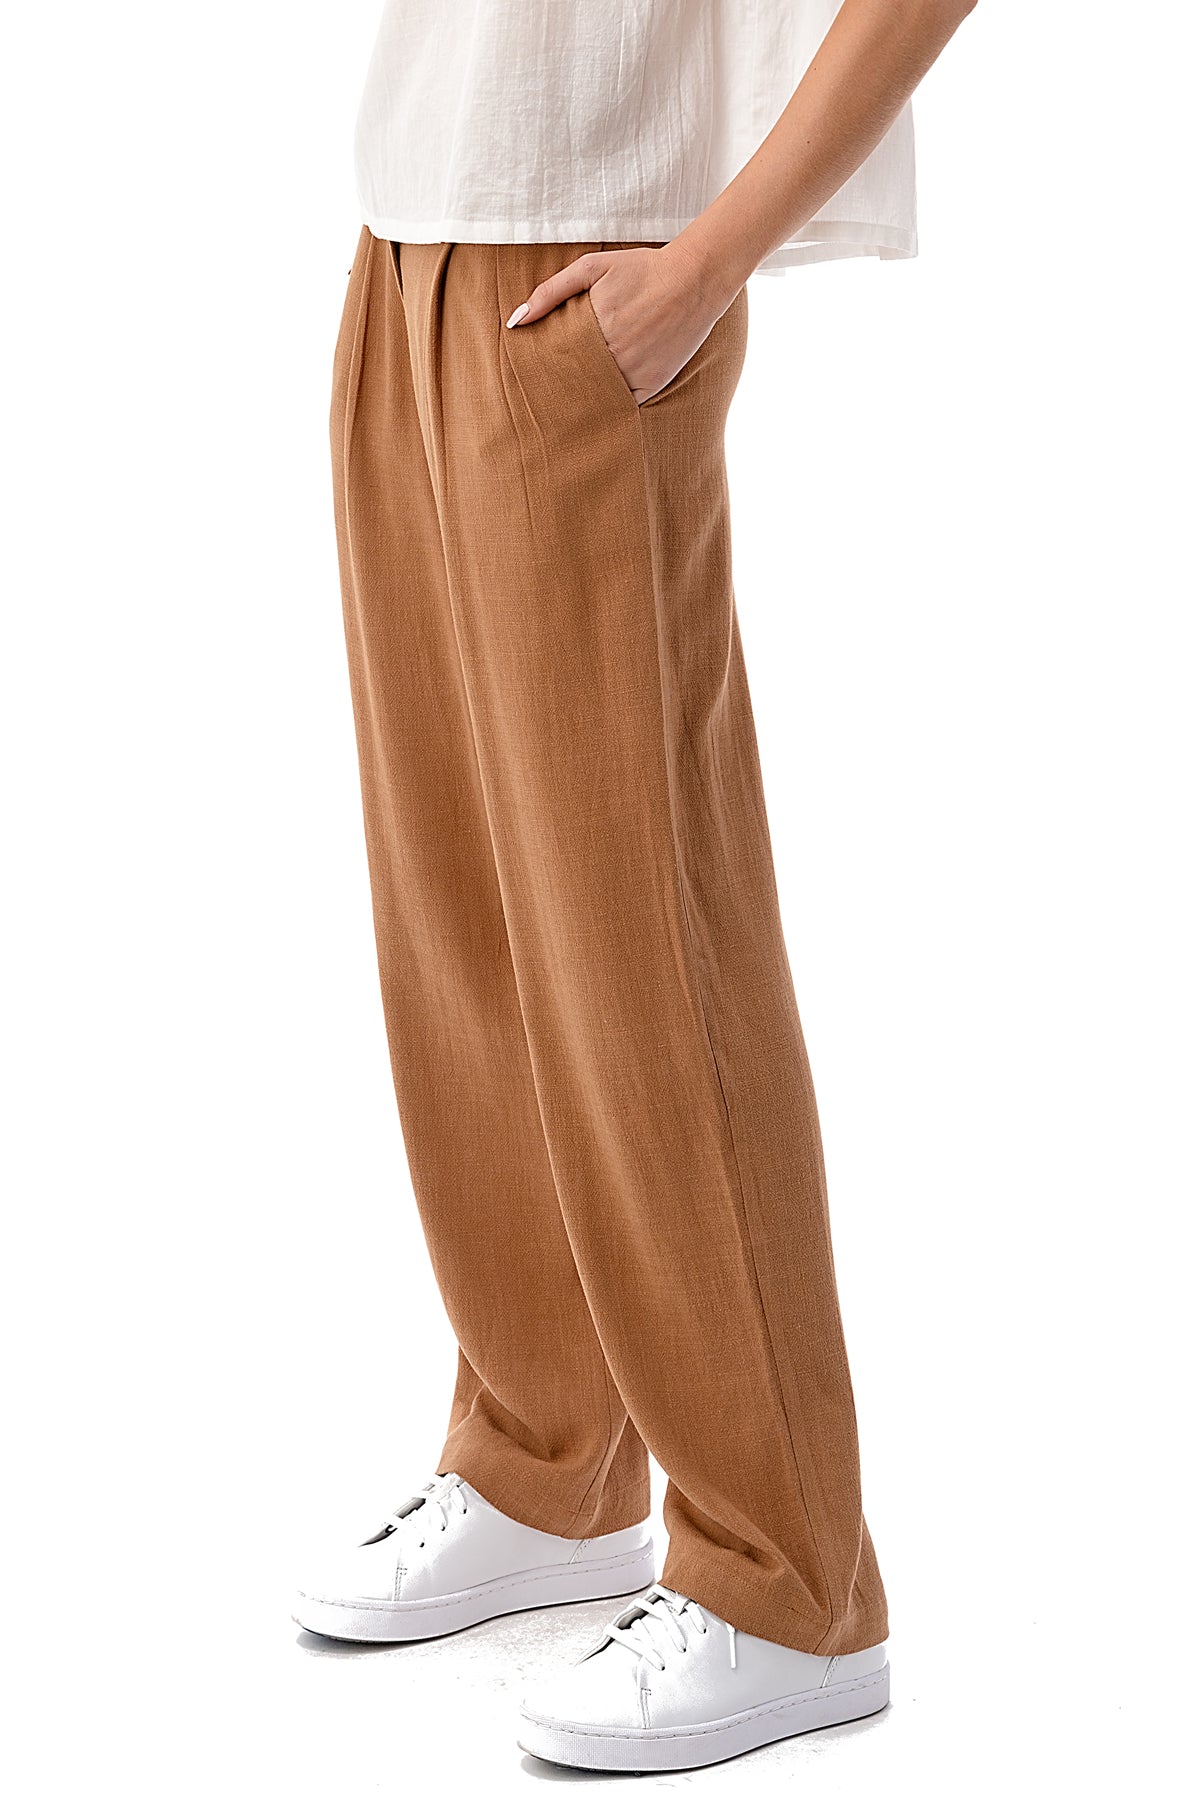 EDGY Land Girl's and Women's Pleated High Band Waist Slit Pocket Casual Pegged Long Pant